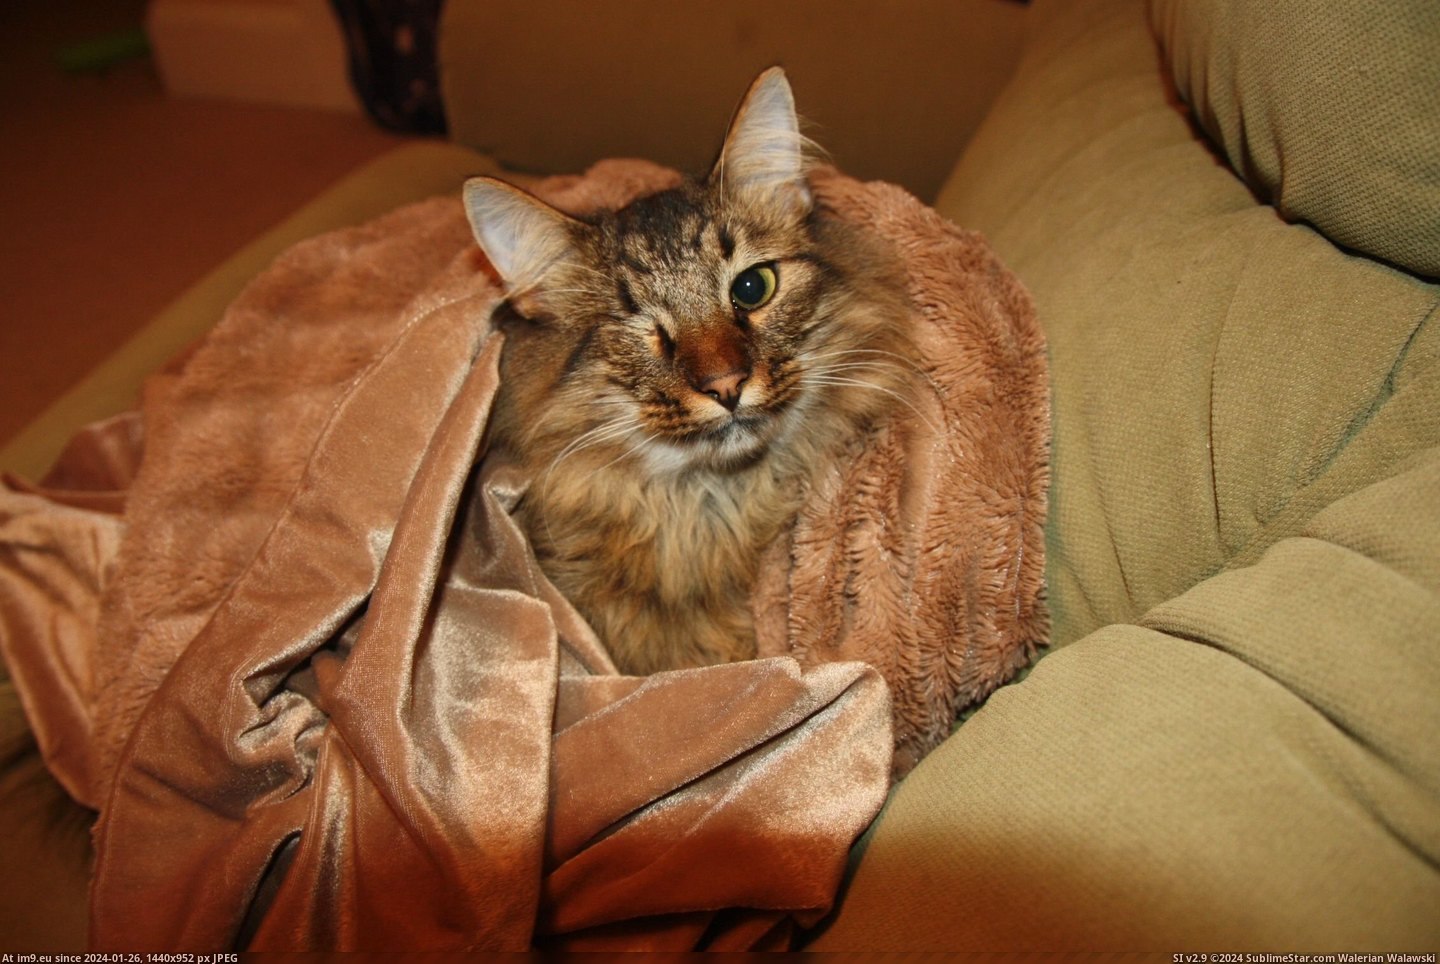 #Cats #Kitty #Wrapped #Fluffy #Soft #Blanket [Cats] my soft, fluffy kitty wrapped up in my soft, fluffy blanket Pic. (Bild von album My r/CATS favs))